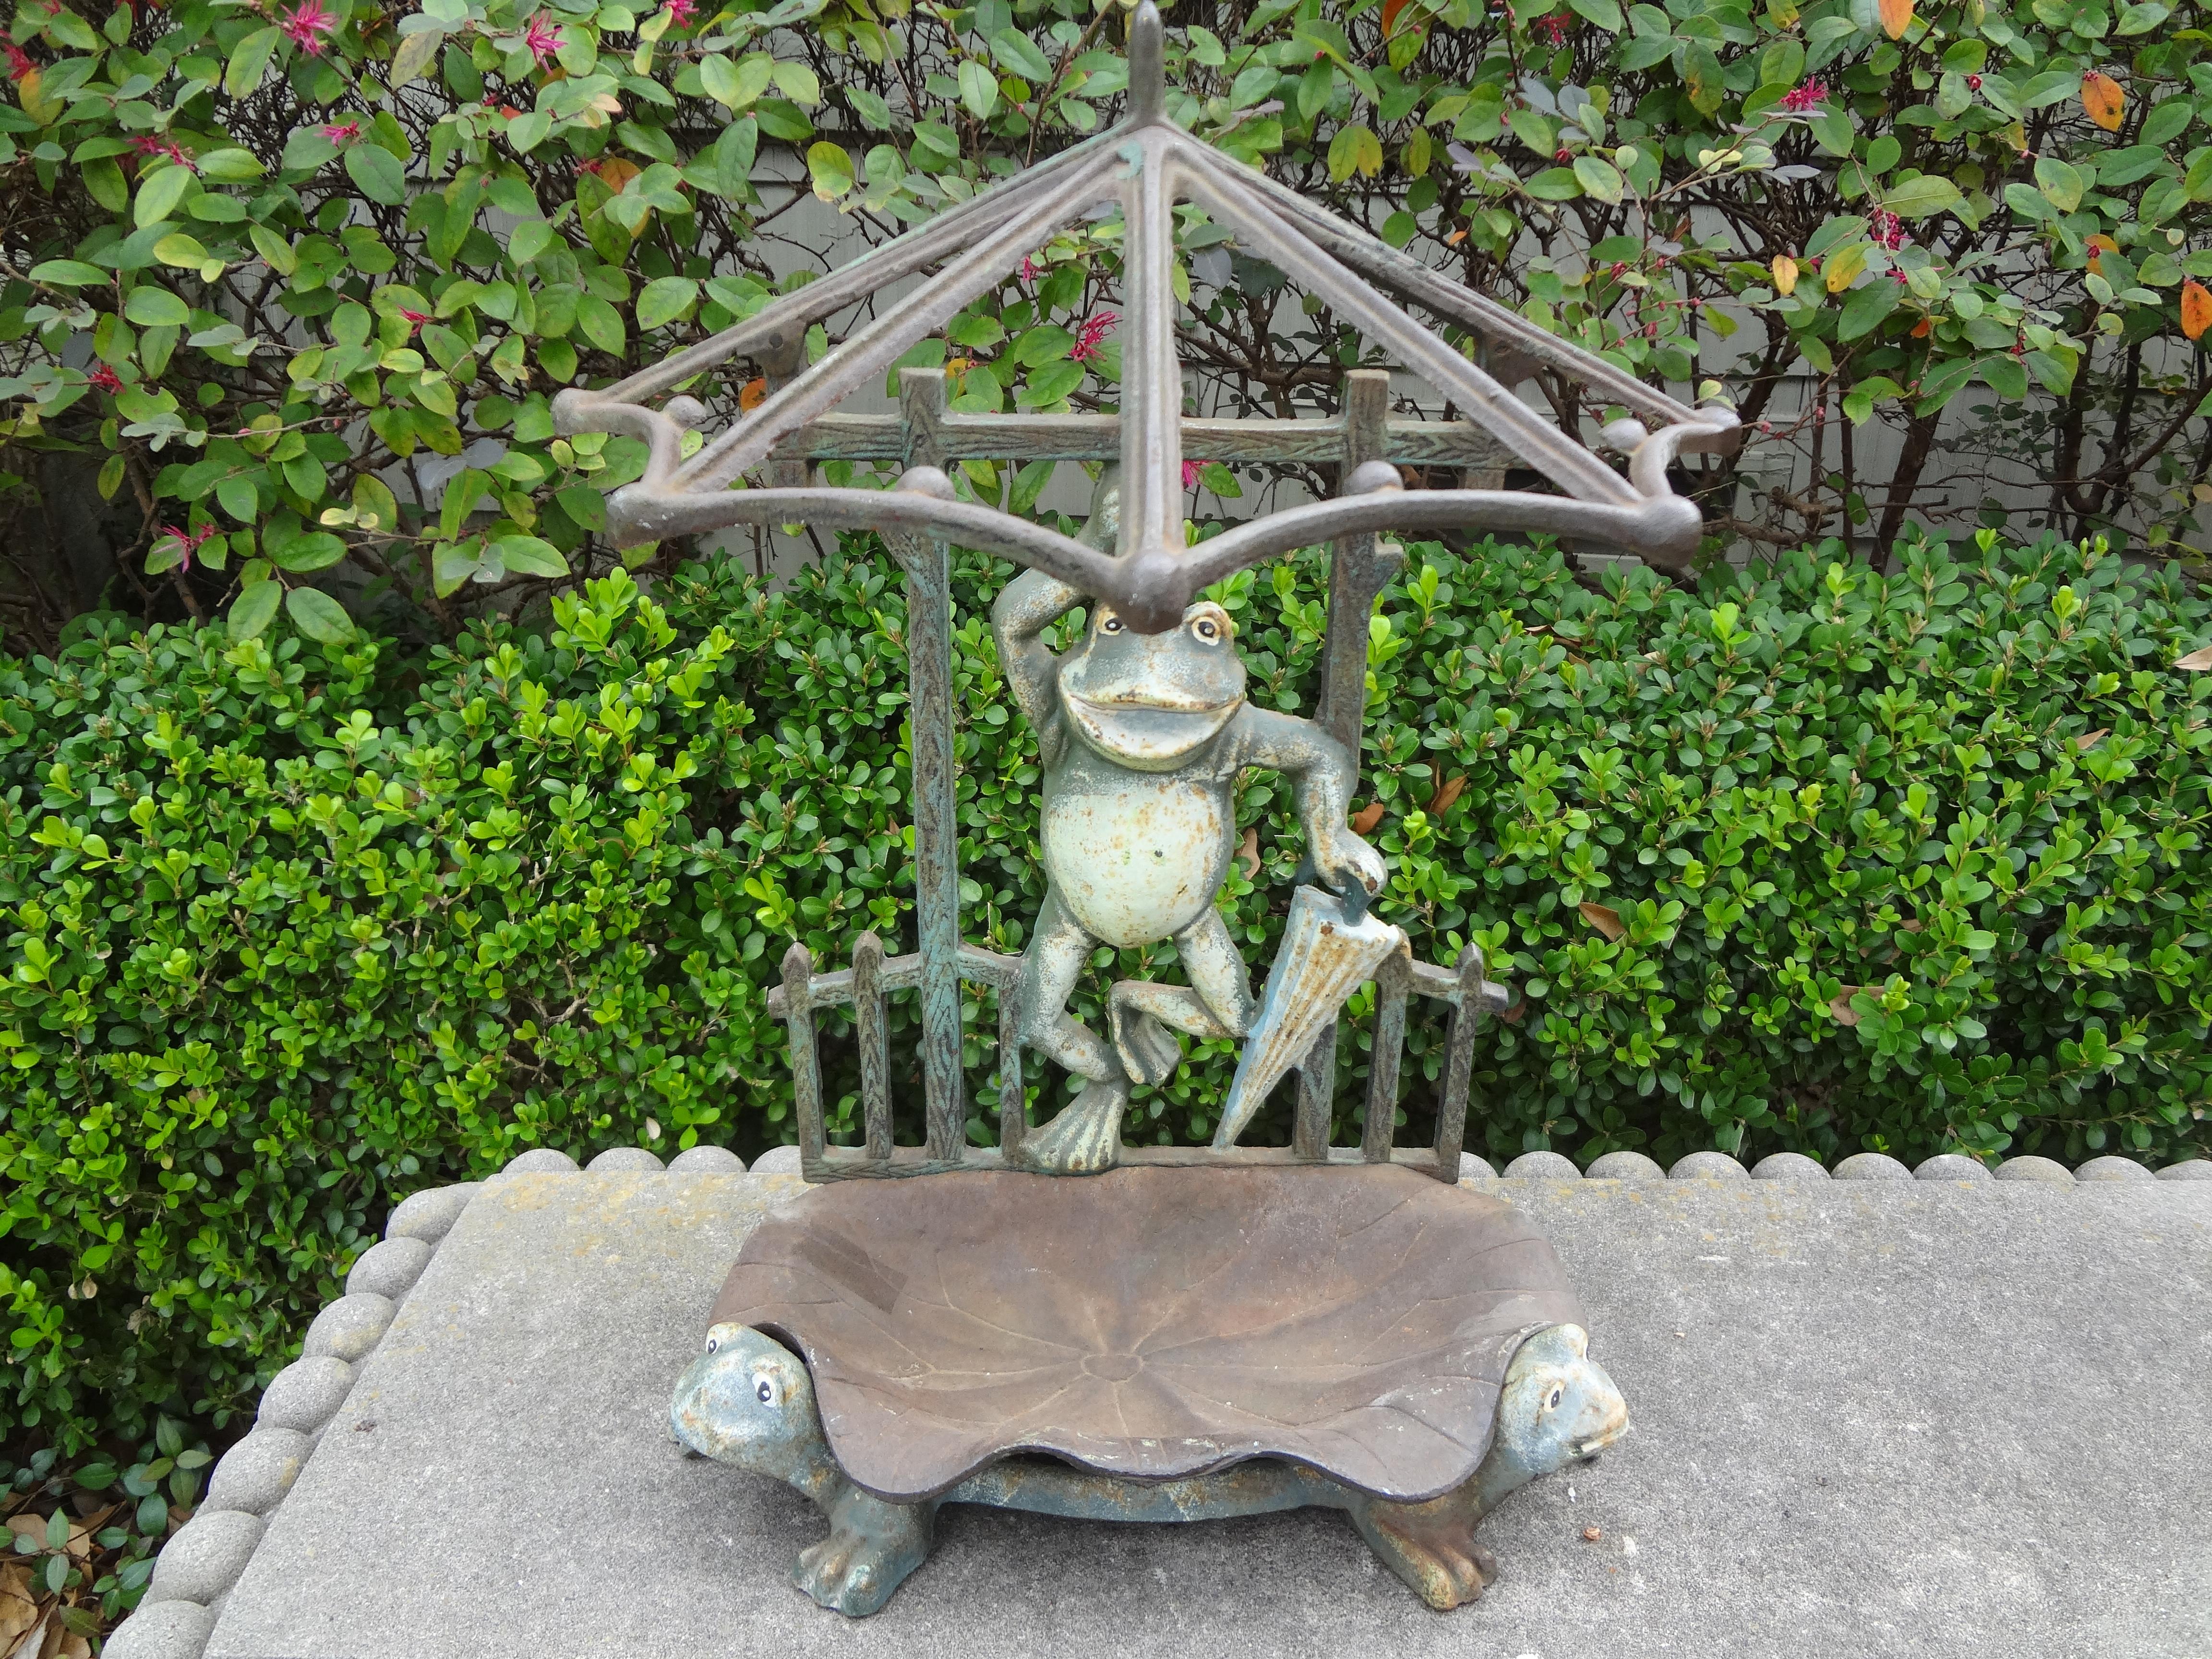 French Art Nouveau iron umbrella stand with frogs.
Whimsical French Art Nouveau patinated wrought iron umbrella stand with frogs. This unusual French iron umbrella stand has a large frog holding an umbrella with a lily pad drip pan with two